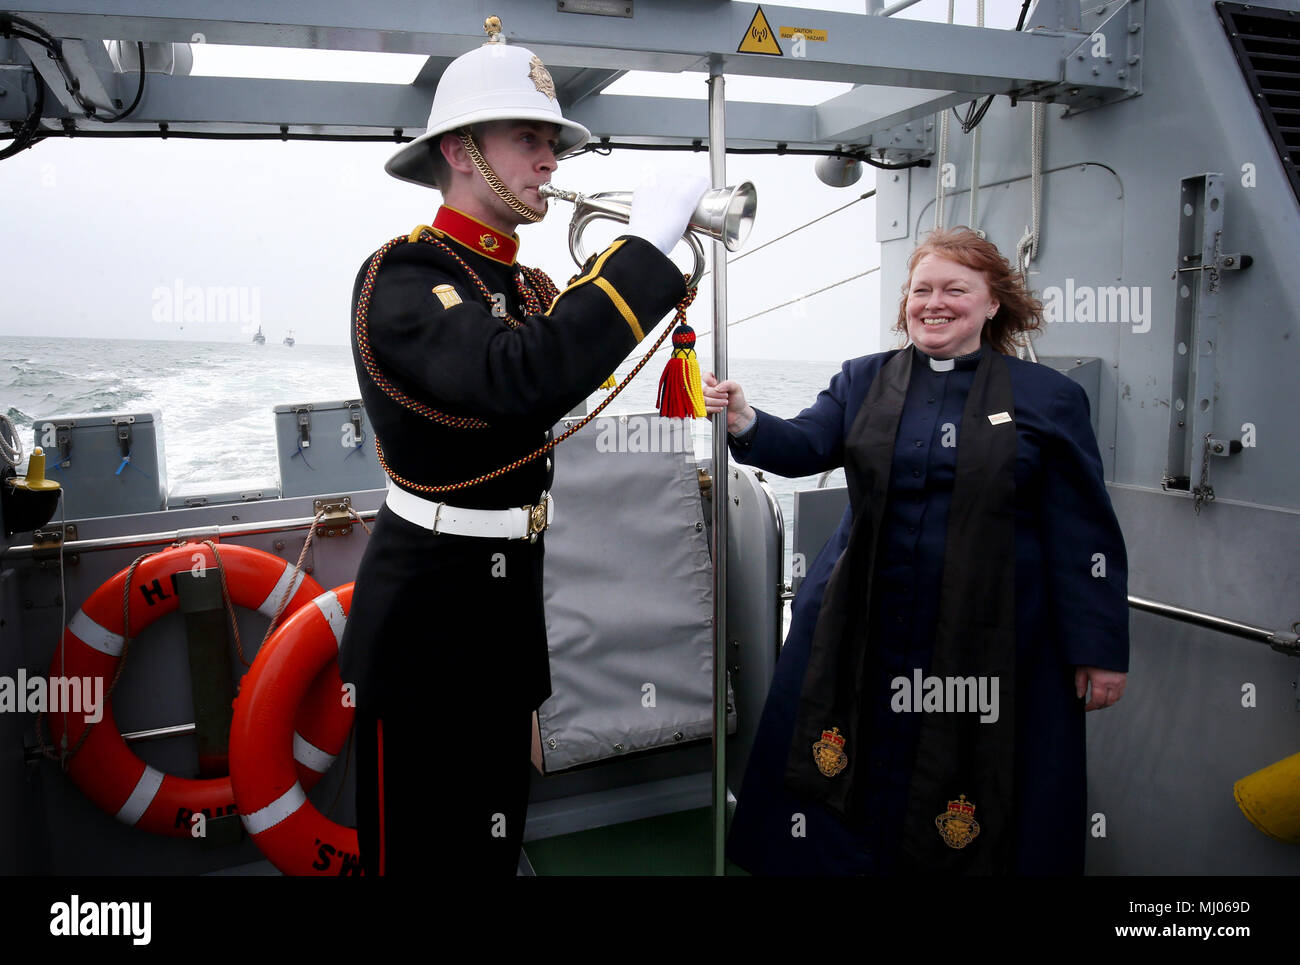 Royal Marines bugler Steven Booth and Reverend Dr Karen Campbell, on board HMS Raider, where a ceremony was conducted in remembrance of the lives lost on the SS Tuscania and HMS Otranto, which both sank in 1918 off the coast of Islay. Stock Photo